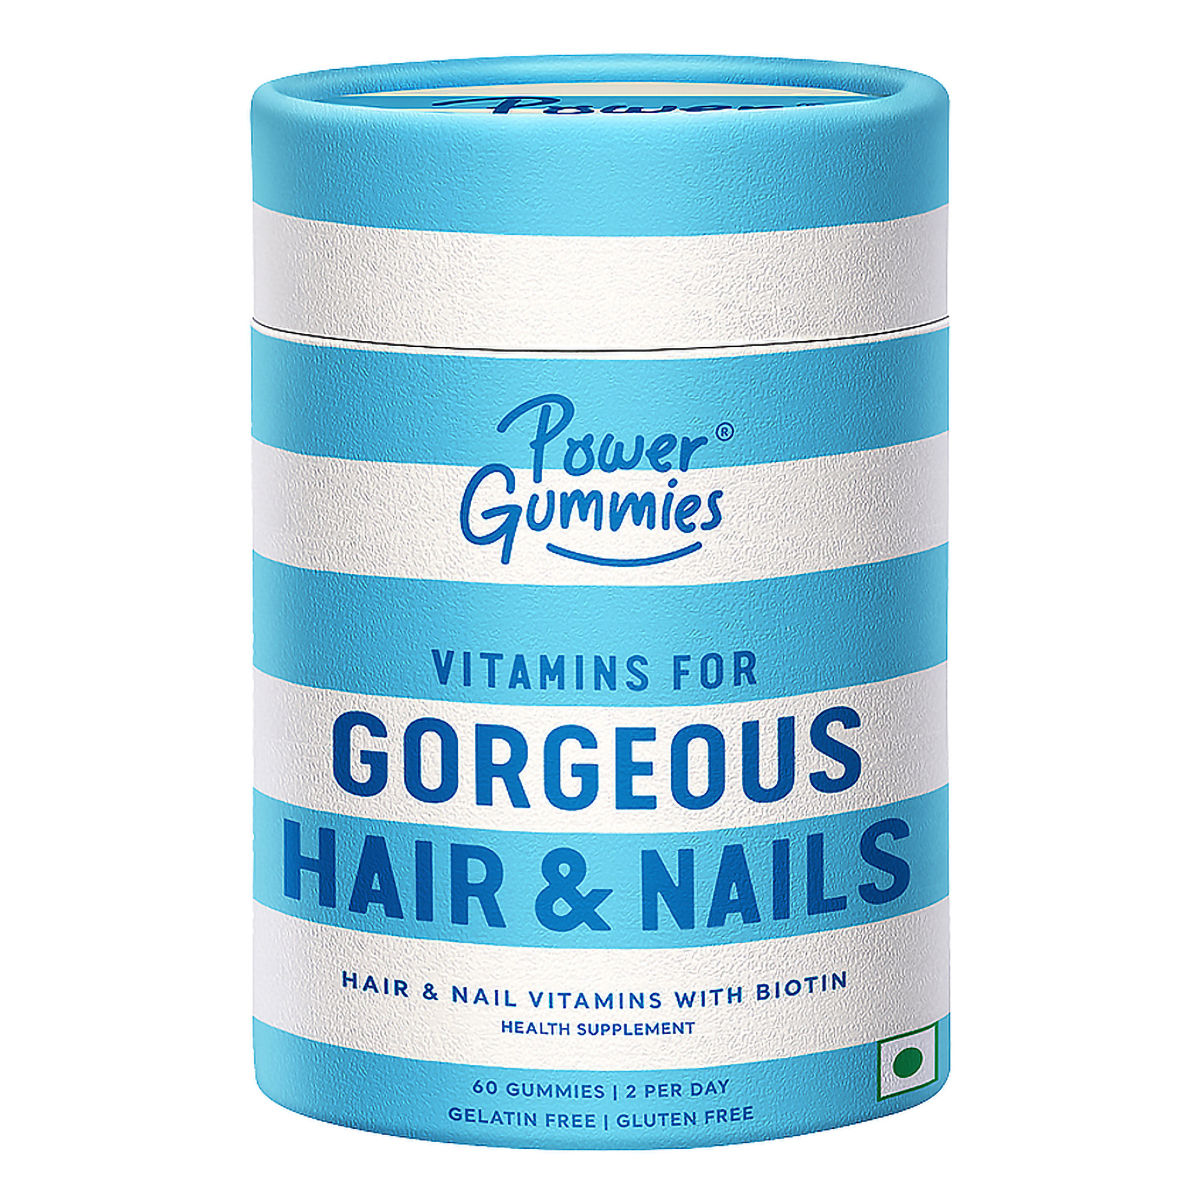 Power Gummies Hair & Nail Vitamins with Biotin Mixed Berry Flavour Gummies, 60 Count, Pack of 1 